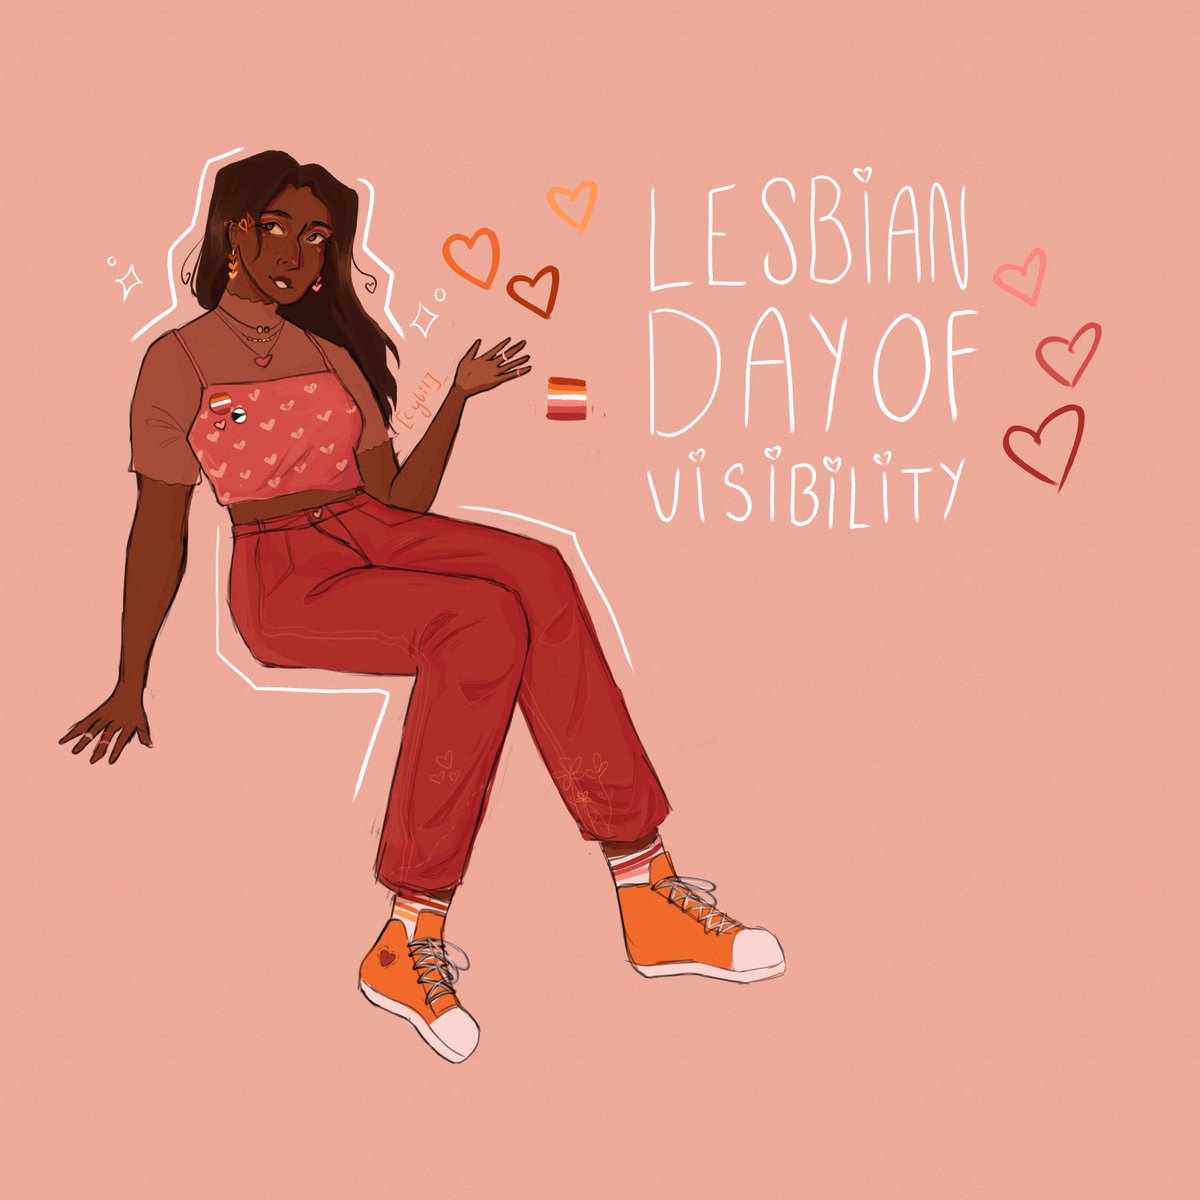 happy #lesbiandayofvisibility from piper mclean <33